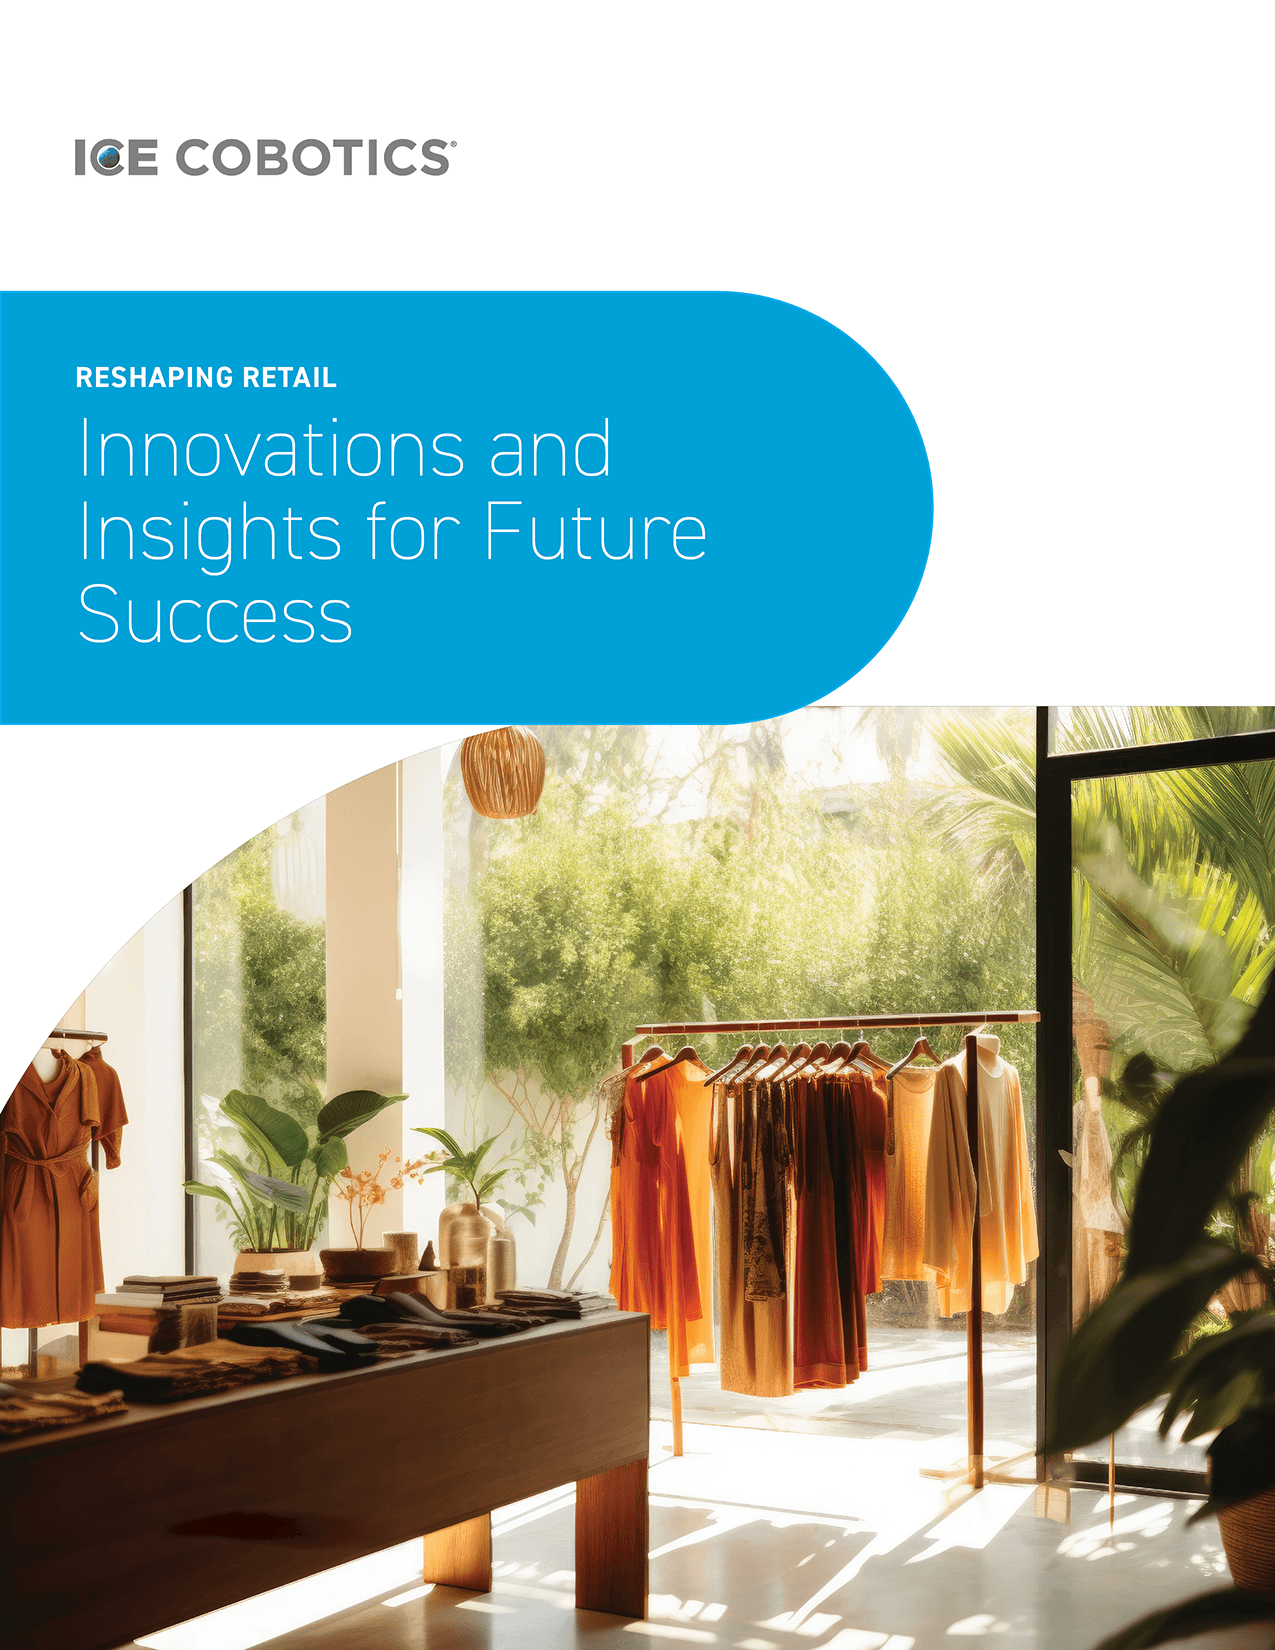 Clothing Racks and Tables in Retail Store with Title: Reshaping Retail Innovations and Insights for Future Success